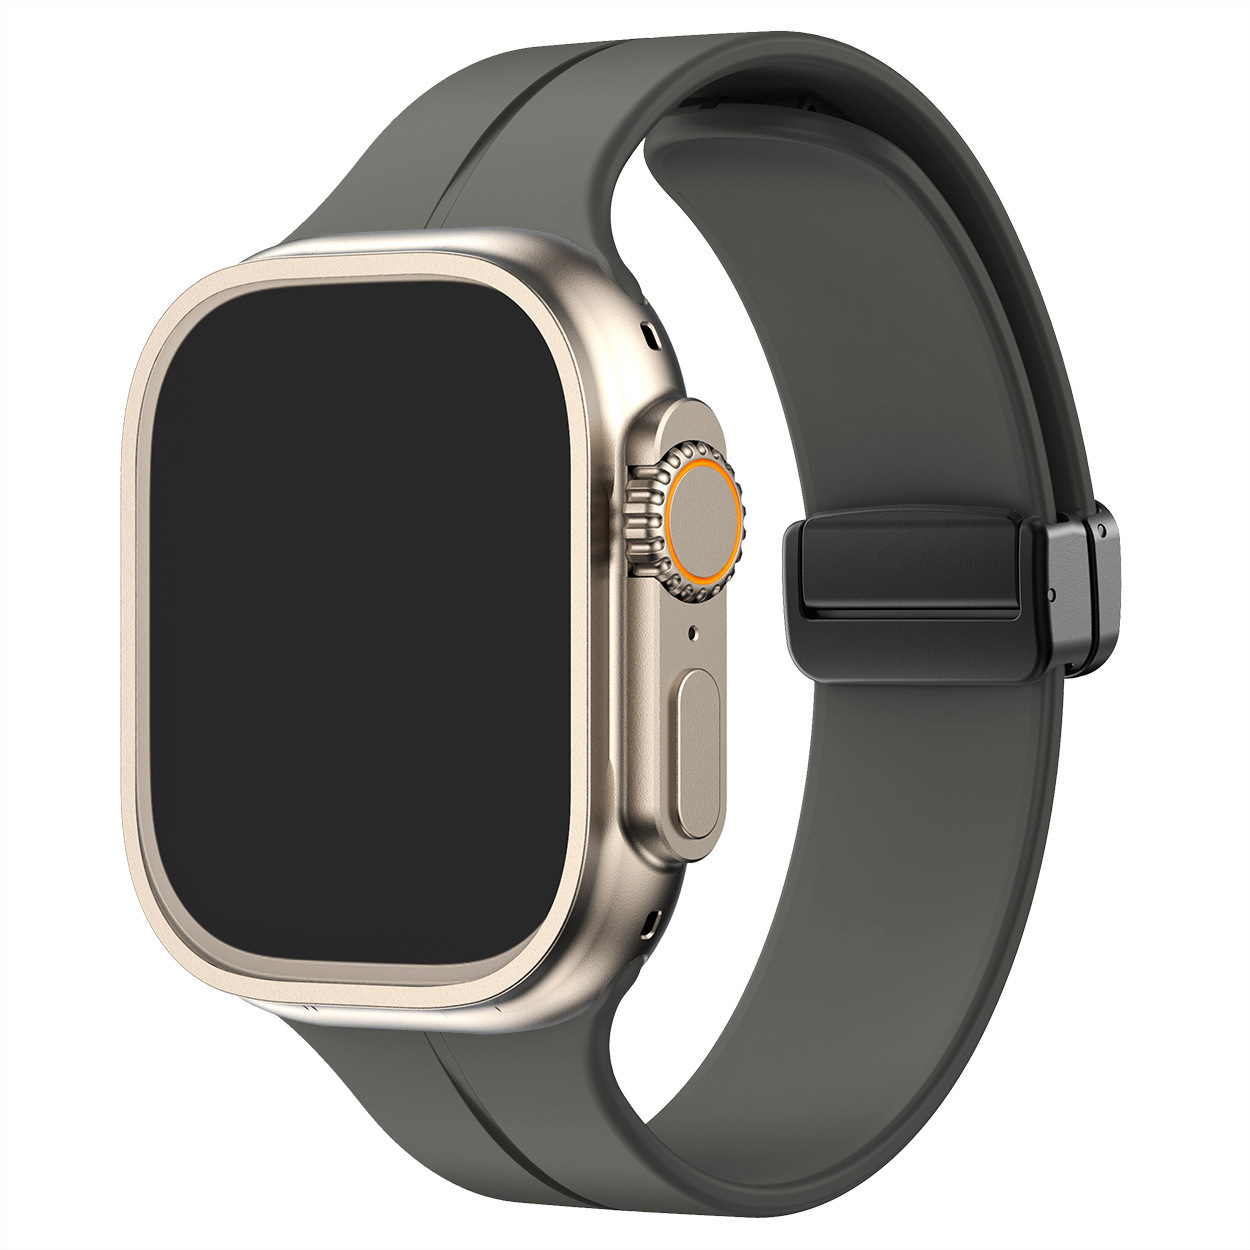 Magnetic Band for Apple Watch (70% OFF)